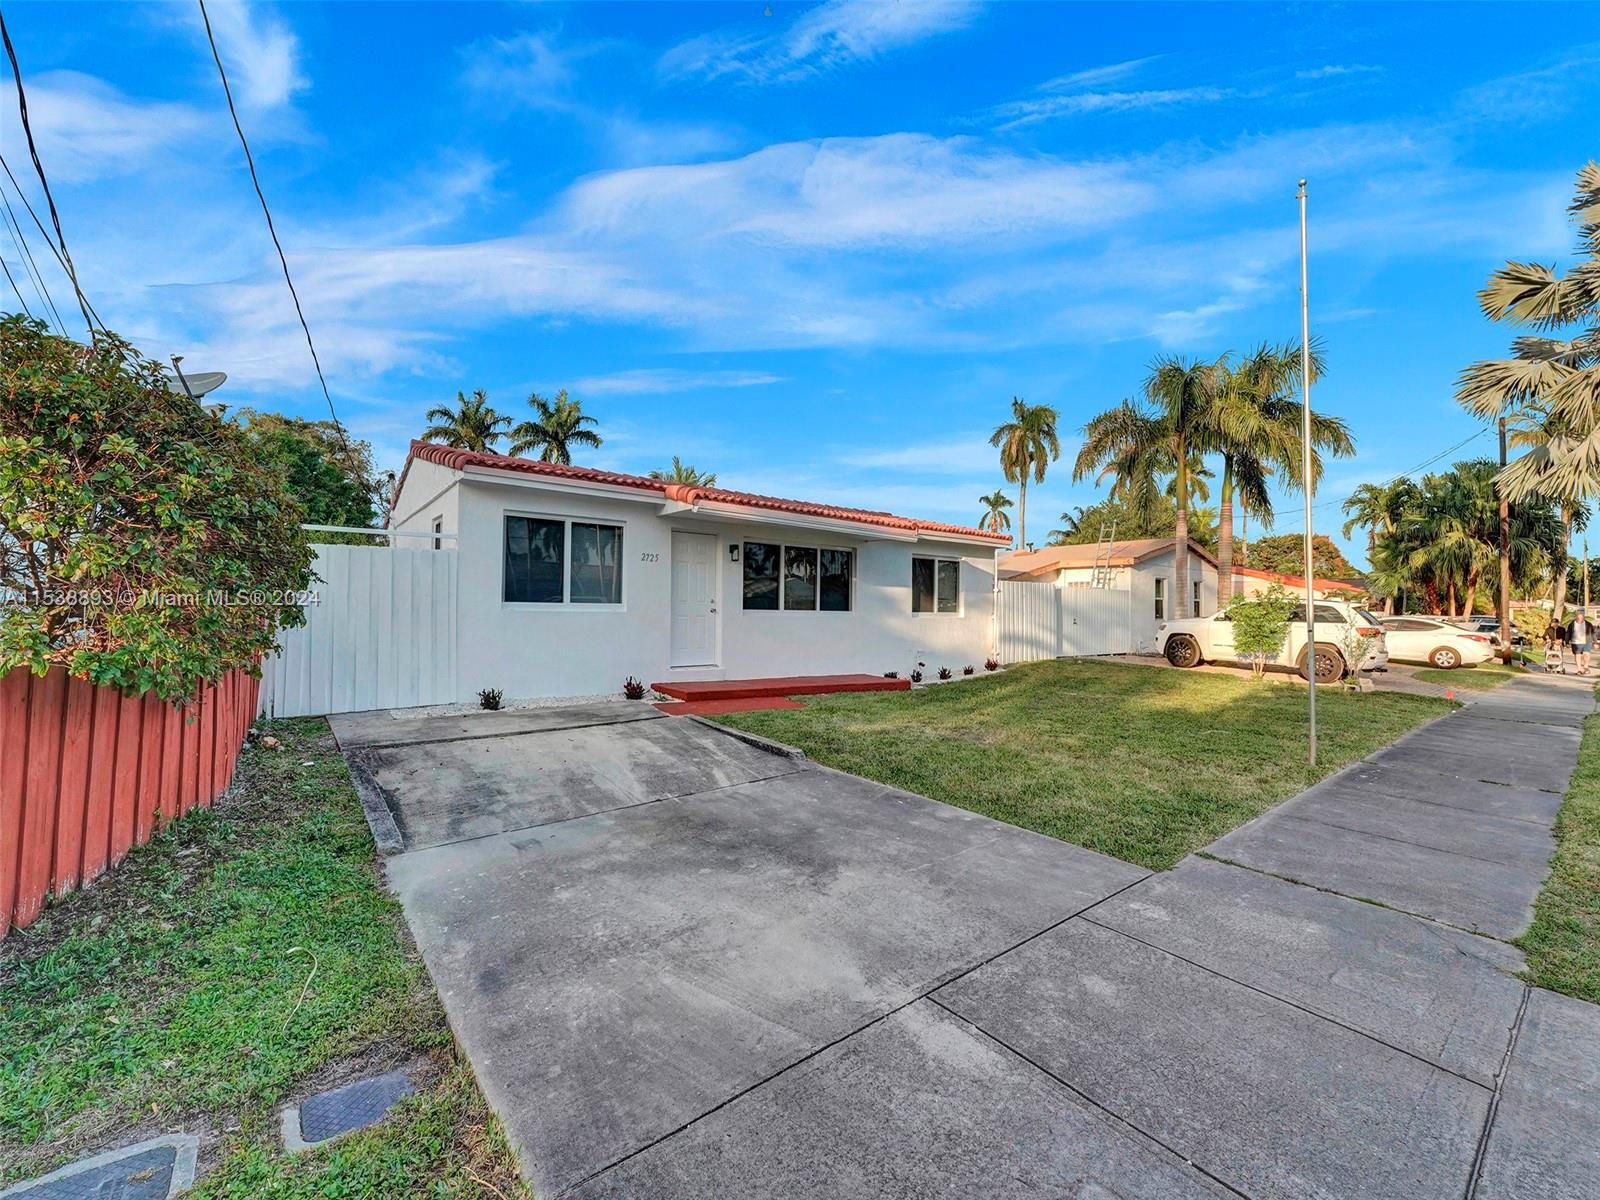 ***LOCATION***LOCATION***LOCATION** Substantially remodeled 3 bed 2 bathroom single family home in m